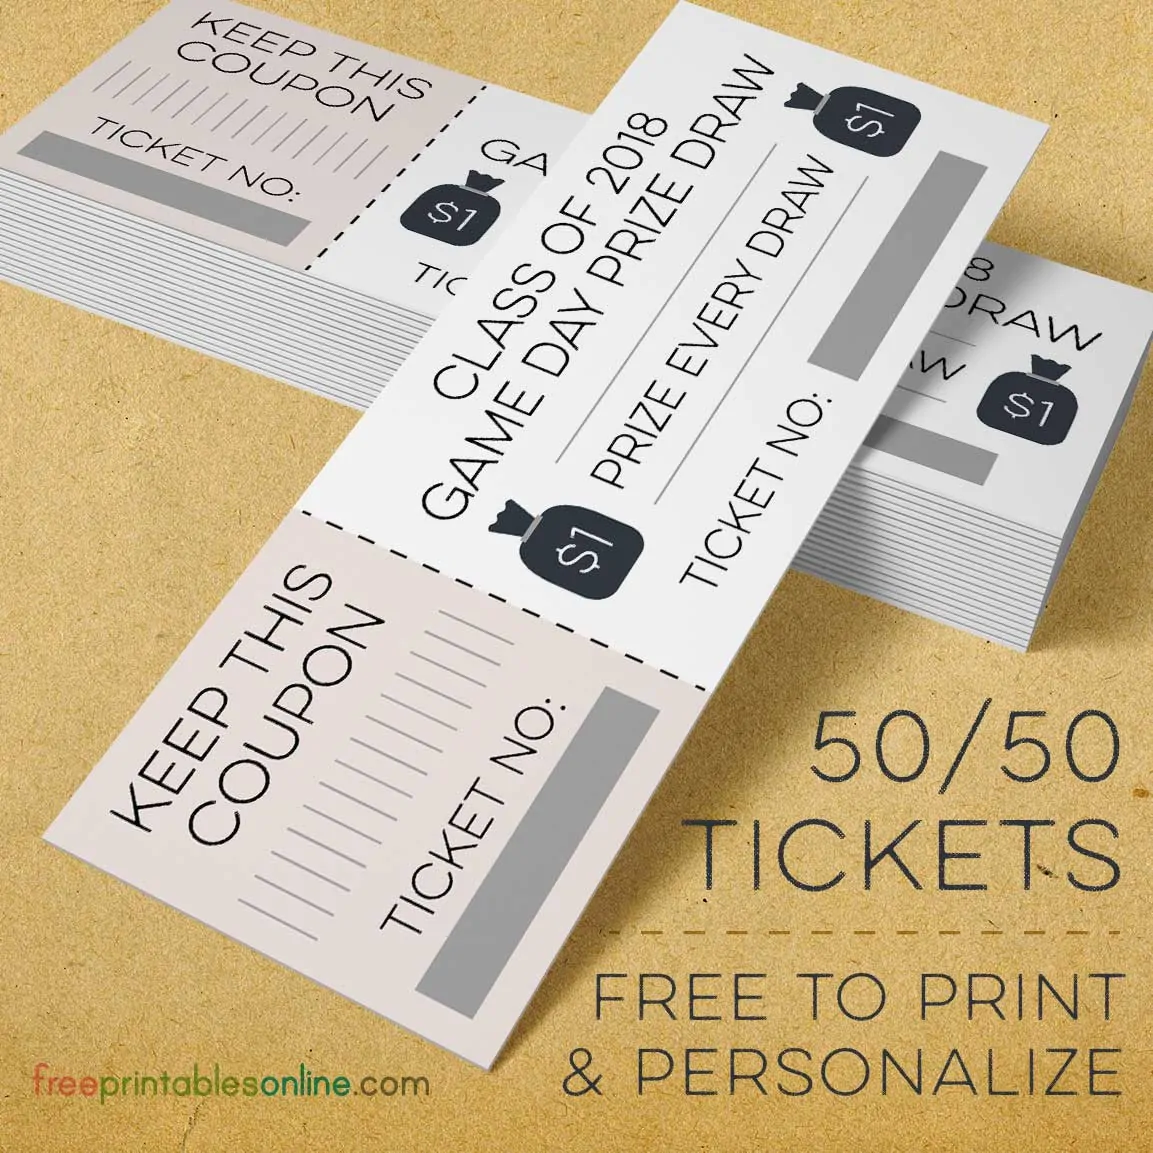 moneybags-50-50-raffle-tickets-free-printables-online